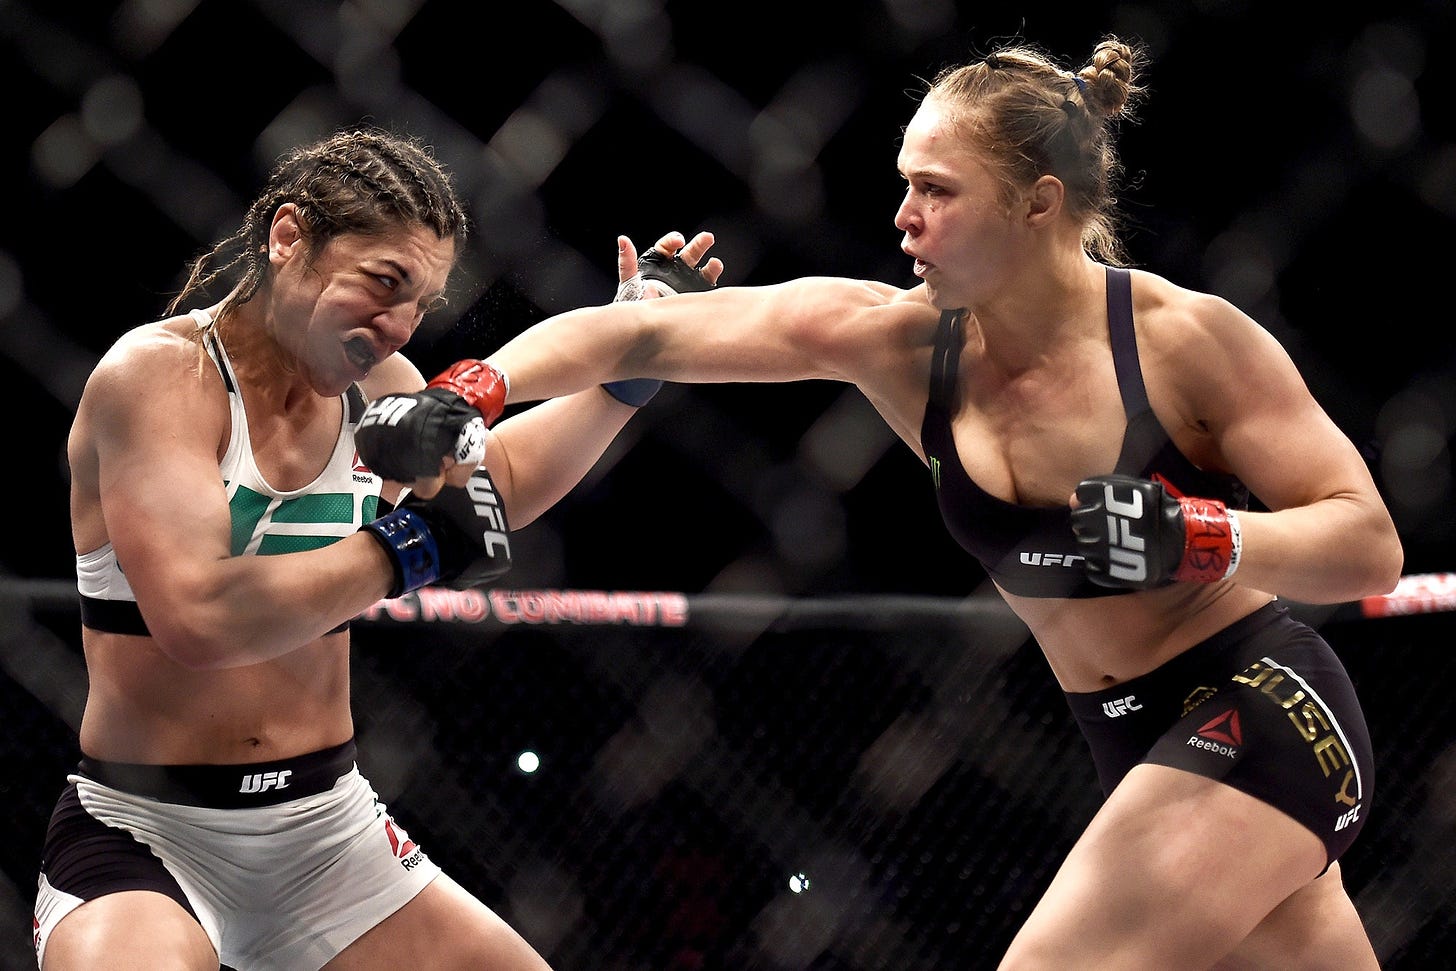 UFC Fighter Ronda Rousey Has Physics-Based Superpowers | WIRED